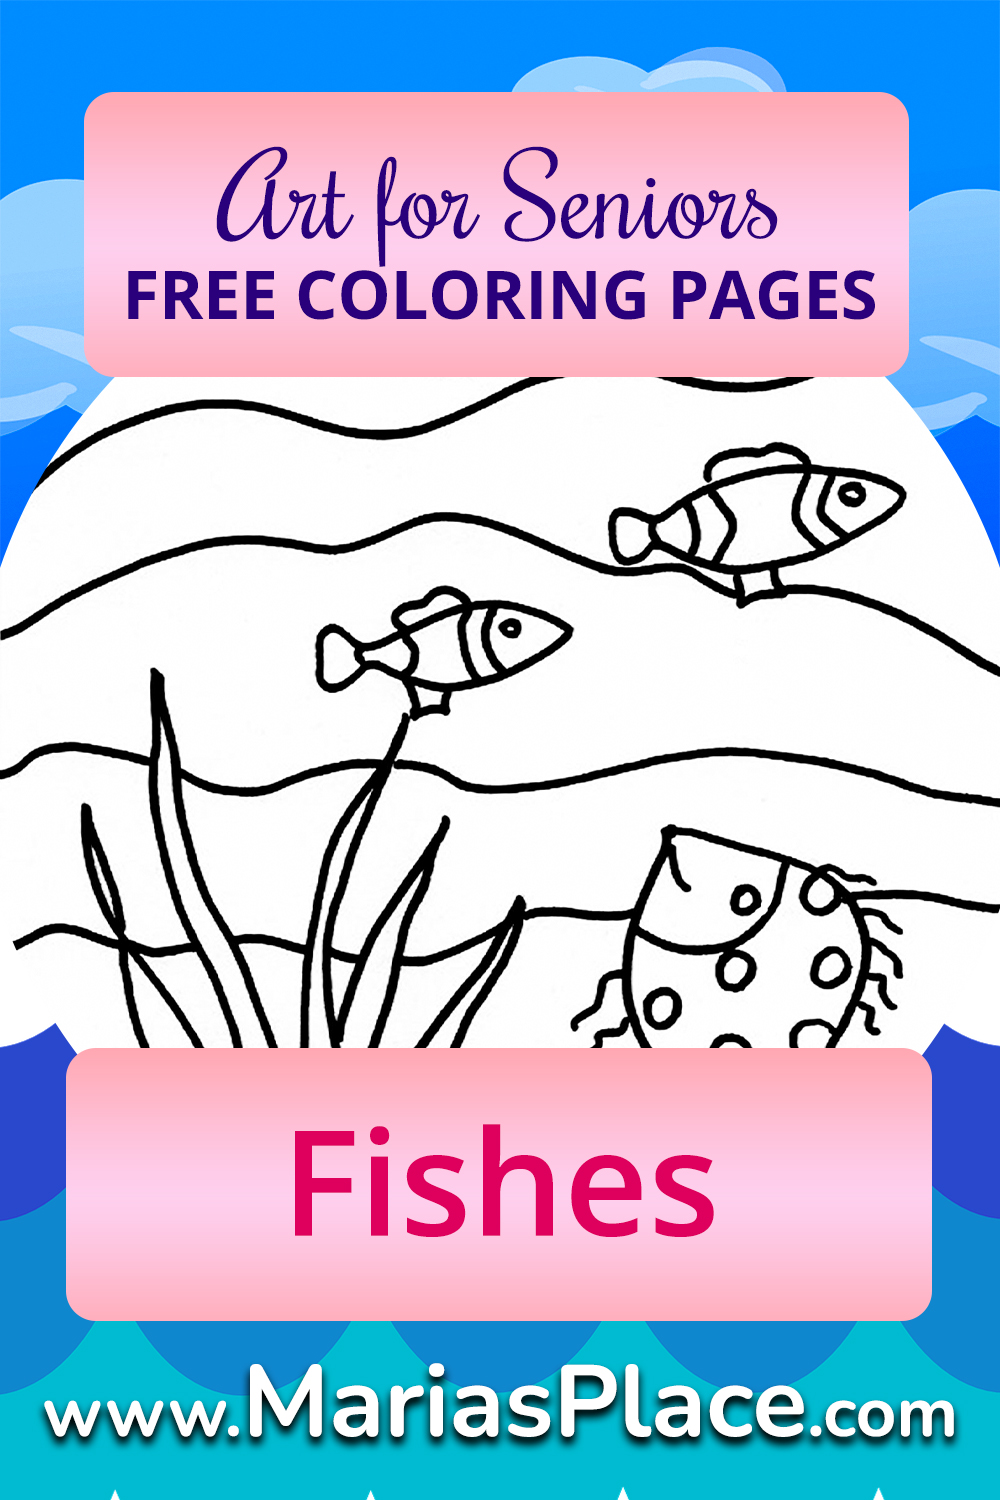 Coloring – Fishes